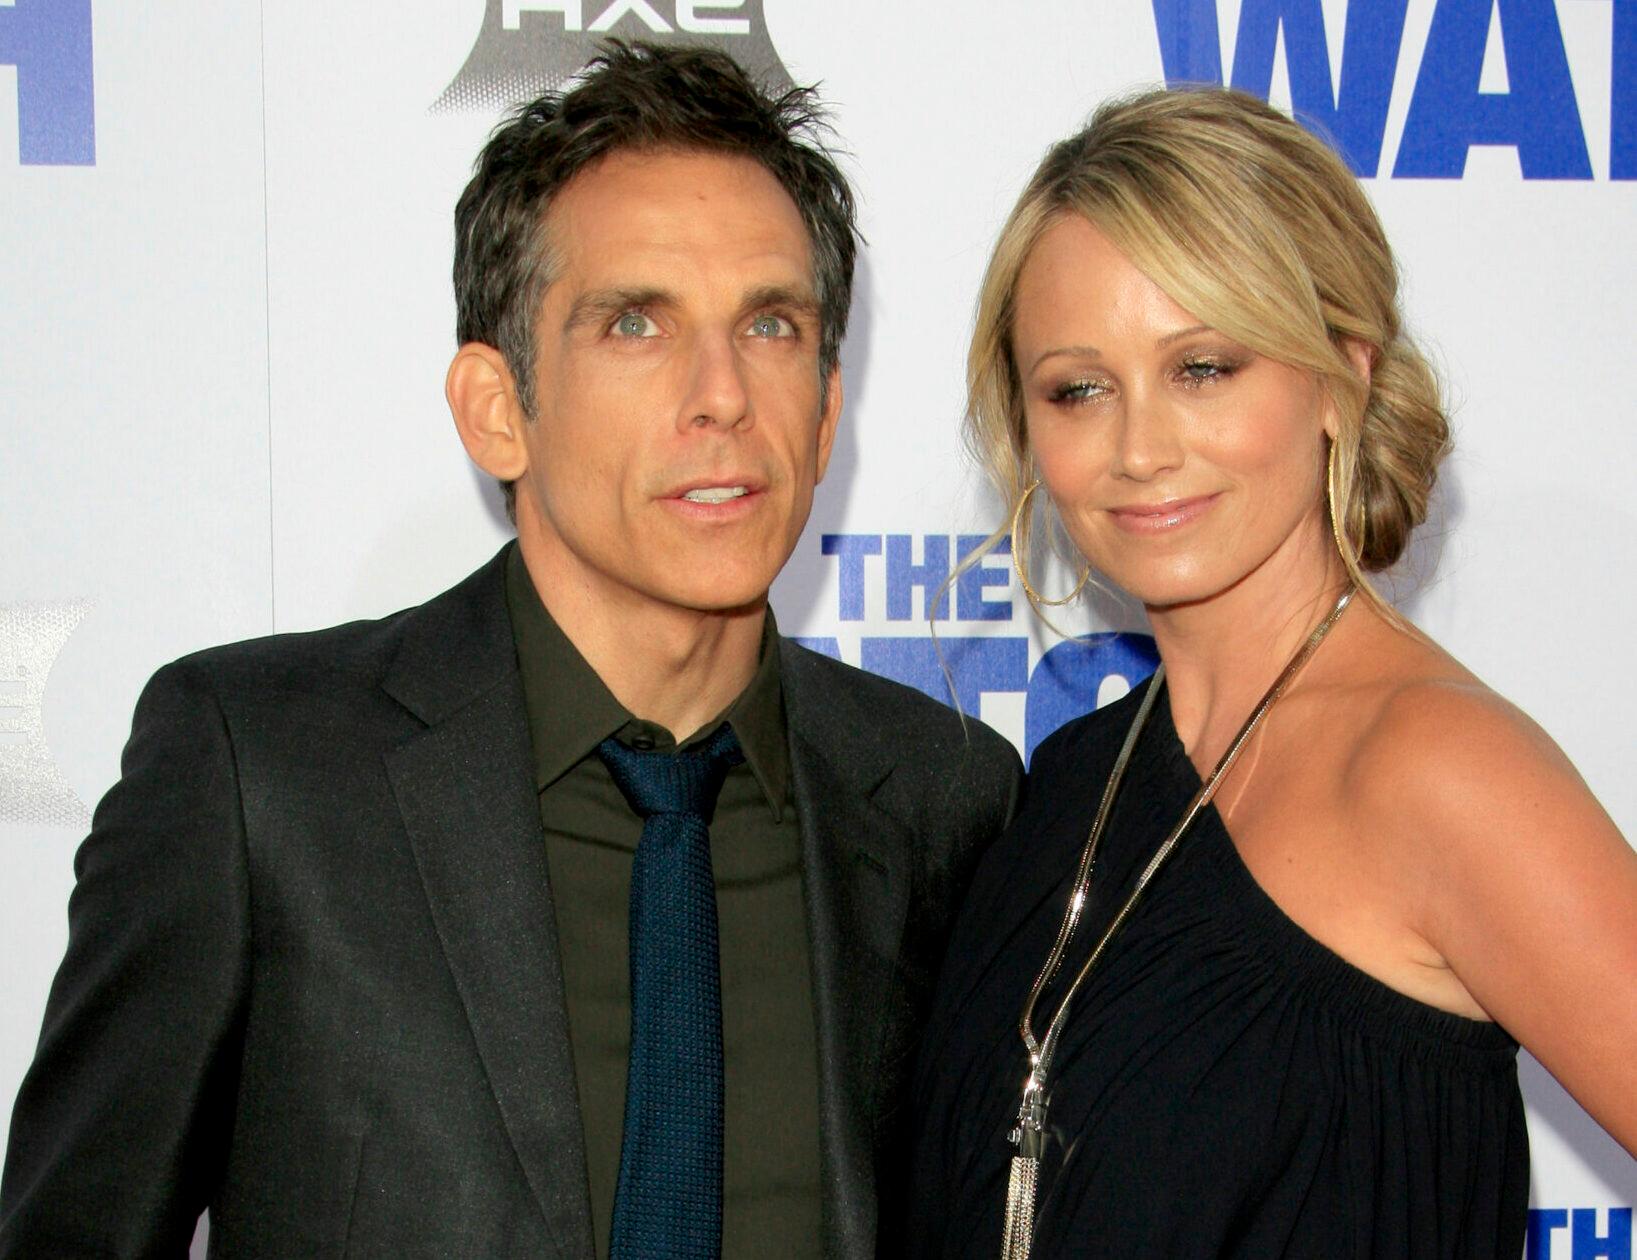 Ben Stiller at the "The Watch" Premiere at the Chinese Theater Christine Taylor